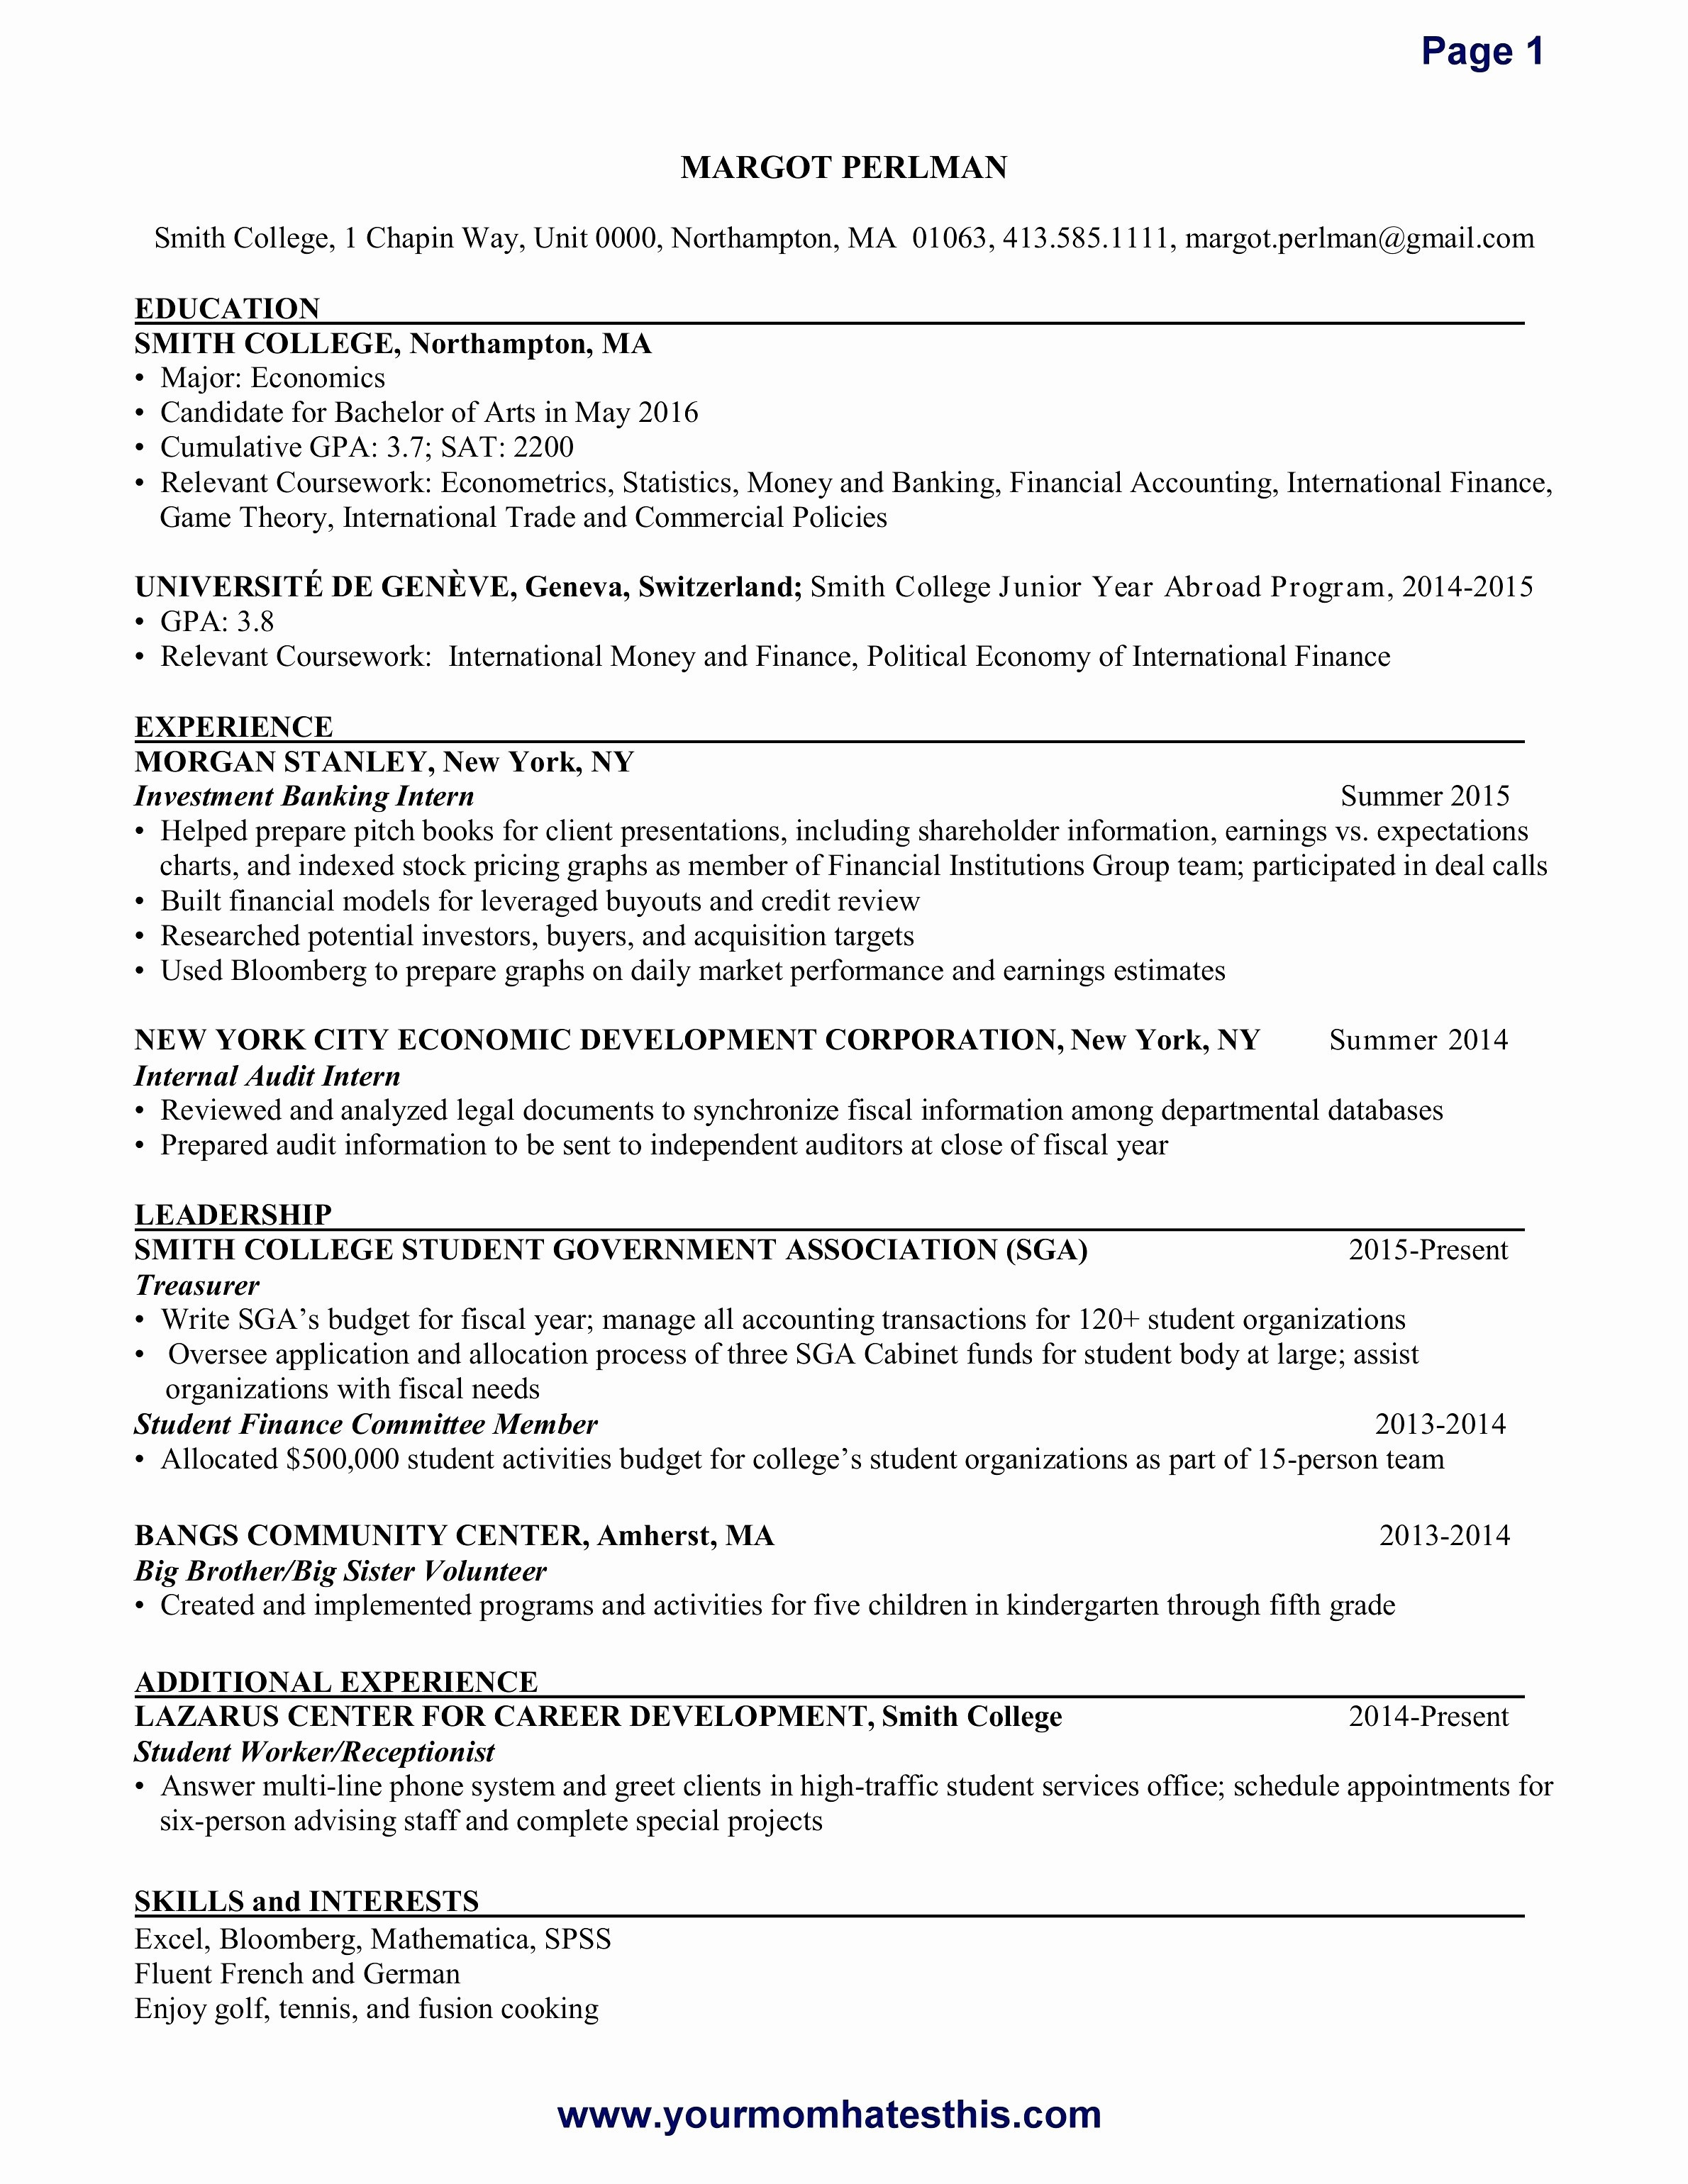 leed letter template example-Doc Resume Templates Updated Best Leed Letter Template Awesome Resume Template C Beautiful 1-c